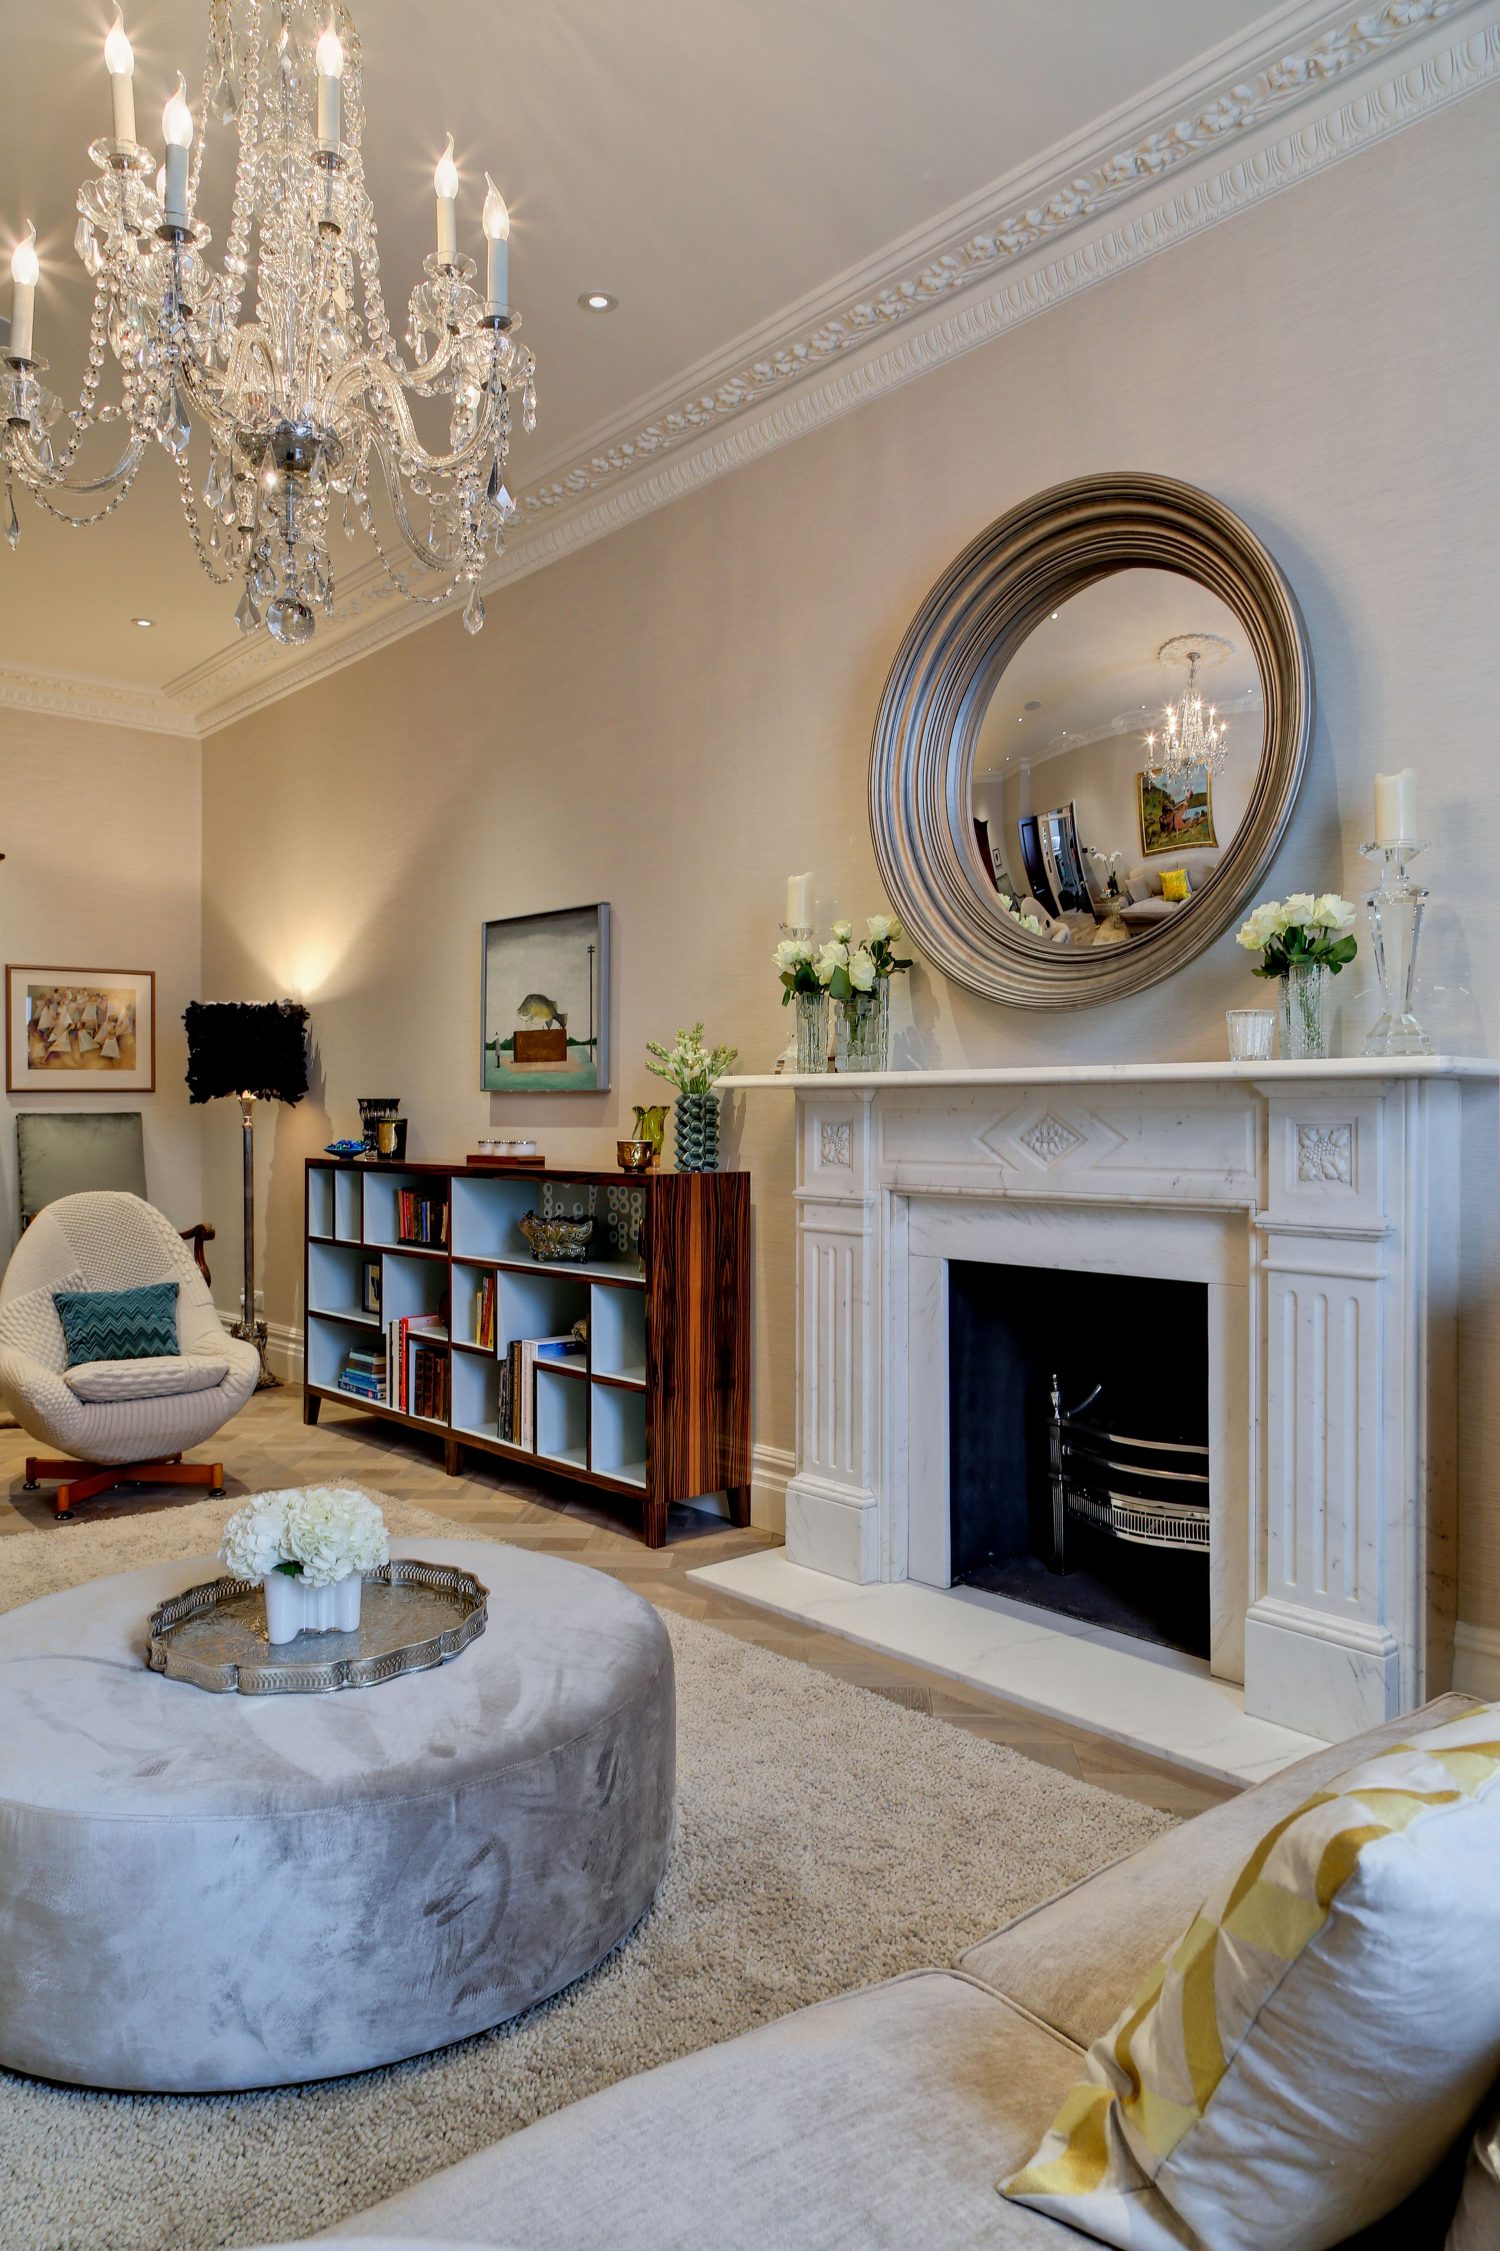 Style and Substance by Daniel Hopwood – living area. Posh interiors, Barnes